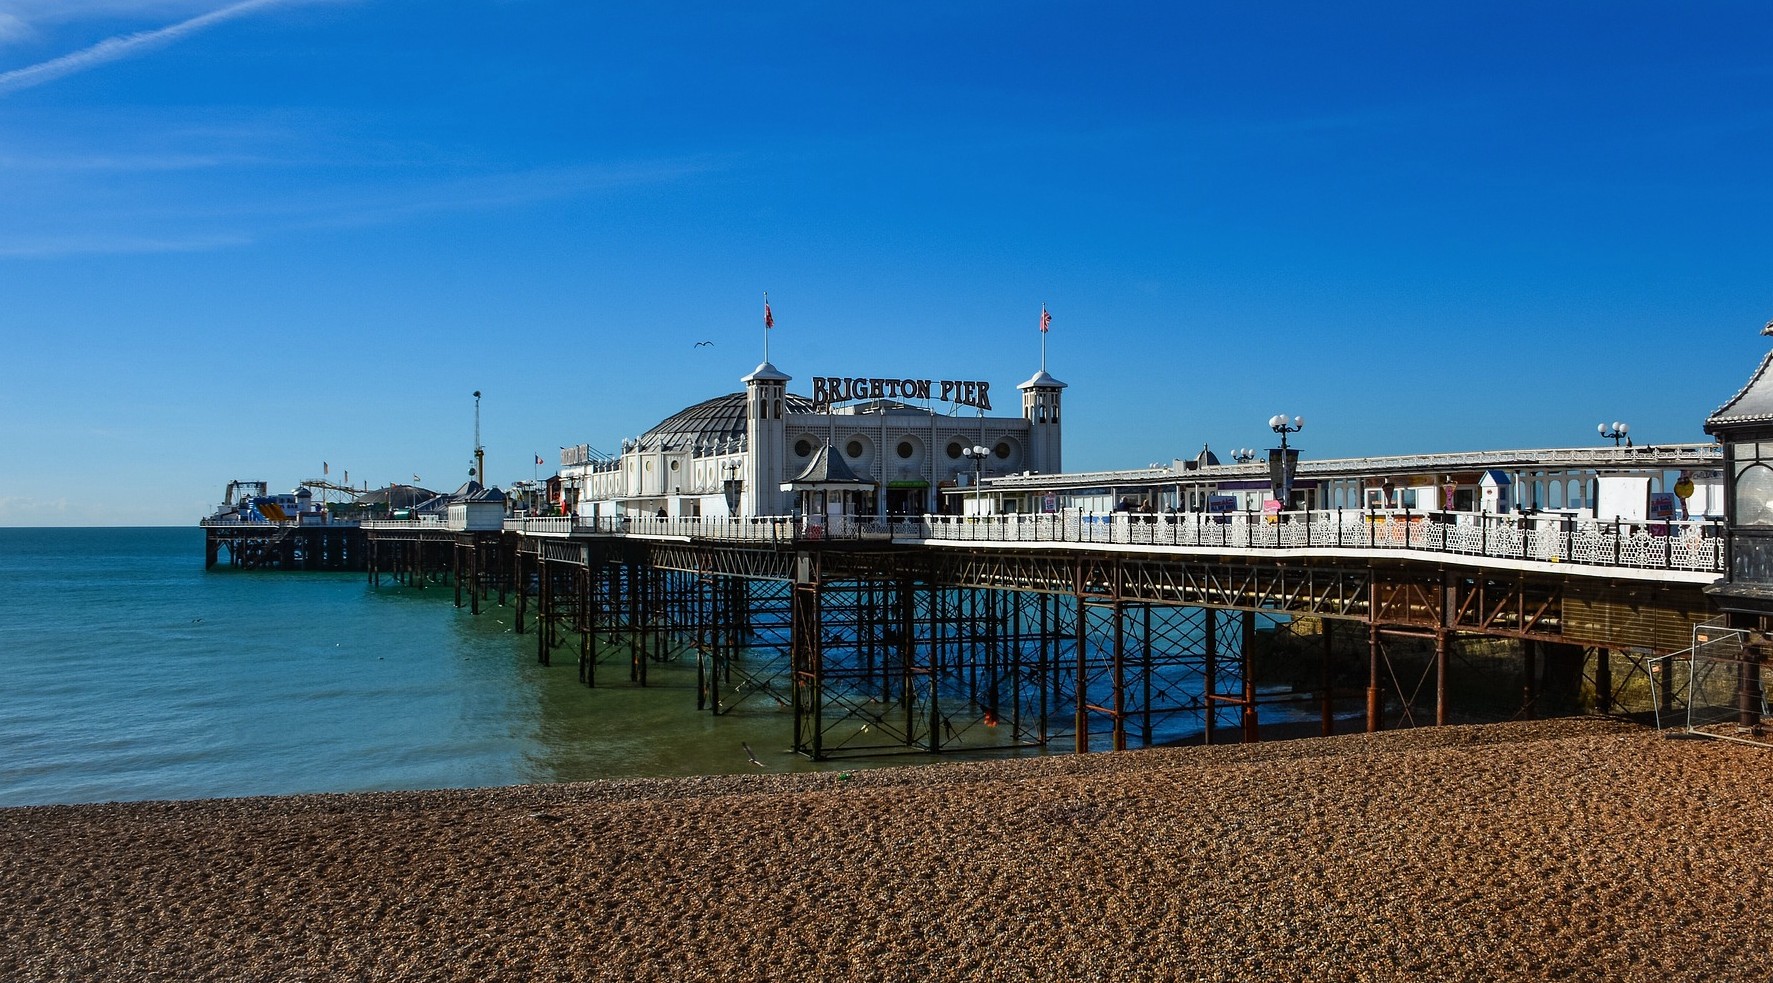 Don't forget to visit Brighton Pier on your lodge stay